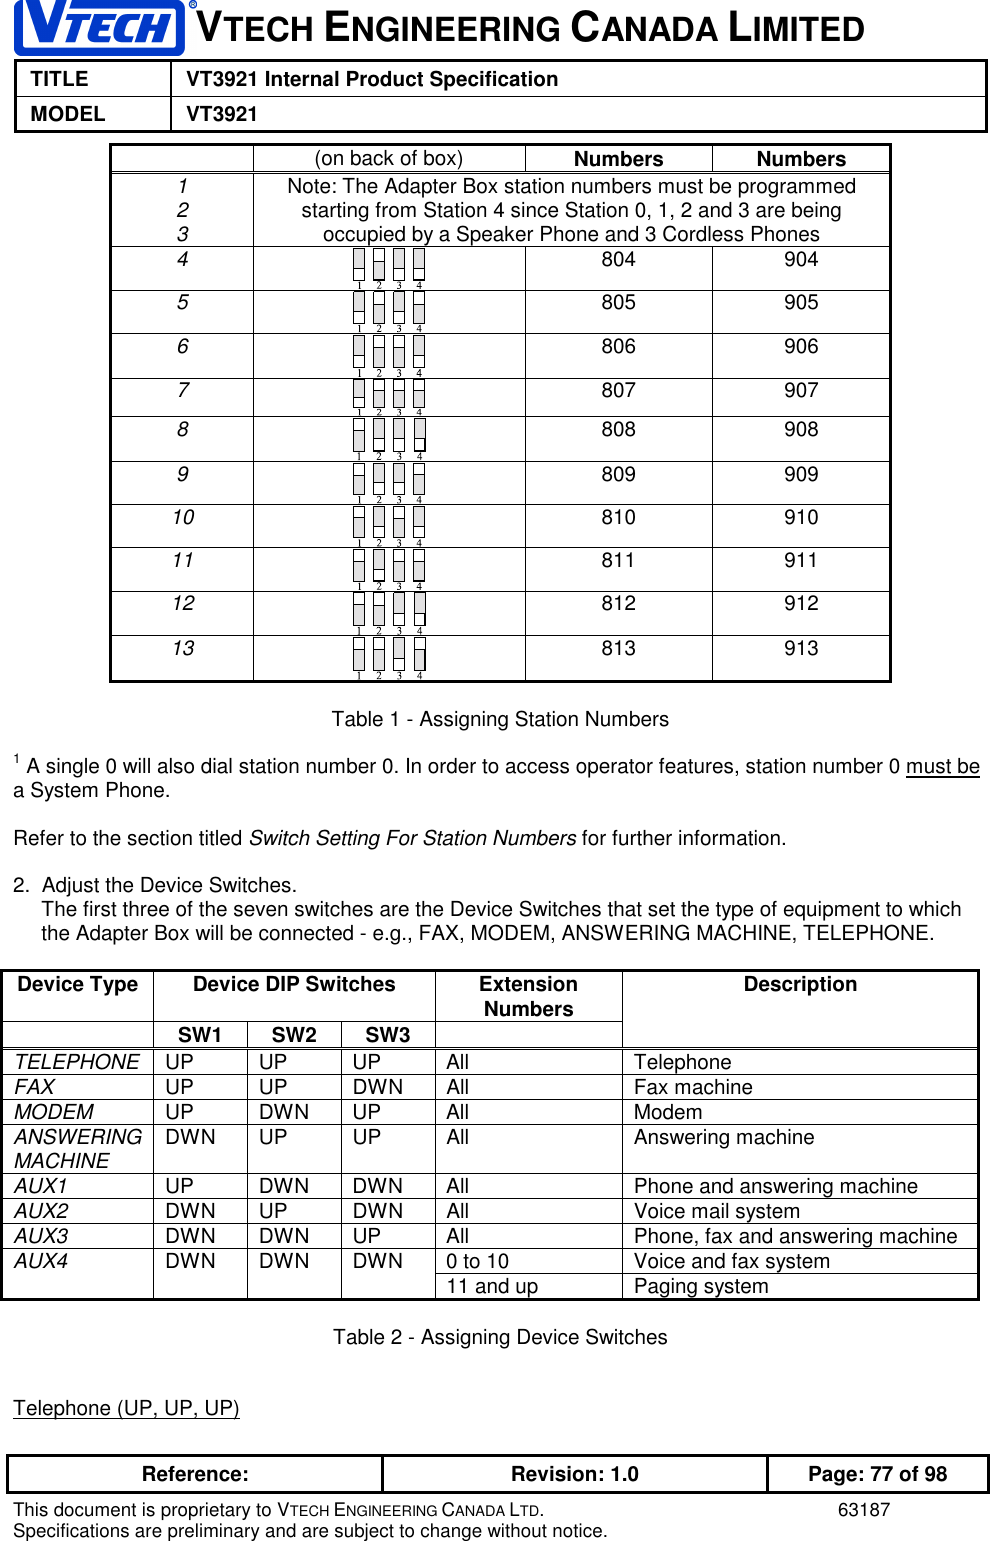 VTECH ENGINEERING CANADA LIMITEDTITLE VT3921 Internal Product SpecificationMODEL VT3921Reference: Revision: 1.0 Page: 77 of 98This document is proprietary to VTECH ENGINEERING CANADA LTD. 63187Specifications are preliminary and are subject to change without notice.(on back of box) Numbers Numbers123Note: The Adapter Box station numbers must be programmedstarting from Station 4 since Station 0, 1, 2 and 3 are beingoccupied by a Speaker Phone and 3 Cordless Phones4804 9045805 9056806 9067807 9078808 9089809 90910 810 91011 811 91112 812 91213 813 913Table 1 - Assigning Station Numbers1 A single 0 will also dial station number 0. In order to access operator features, station number 0 must bea System Phone.Refer to the section titled Switch Setting For Station Numbers for further information.2.  Adjust the Device Switches.The first three of the seven switches are the Device Switches that set the type of equipment to whichthe Adapter Box will be connected - e.g., FAX, MODEM, ANSWERING MACHINE, TELEPHONE.Device Type Device DIP Switches ExtensionNumbers DescriptionSW1 SW2 SW3TELEPHONE UP UP UP All TelephoneFAX UP UP DWN All Fax machineMODEM UP DWN UP All ModemANSWERINGMACHINE DWN UP UP All Answering machineAUX1 UP DWN DWN All Phone and answering machineAUX2 DWN UP DWN All Voice mail systemAUX3 DWN DWN UP All Phone, fax and answering machineAUX4 DWN DWN DWN 0 to 10 Voice and fax system11 and up Paging systemTable 2 - Assigning Device SwitchesTelephone (UP, UP, UP)